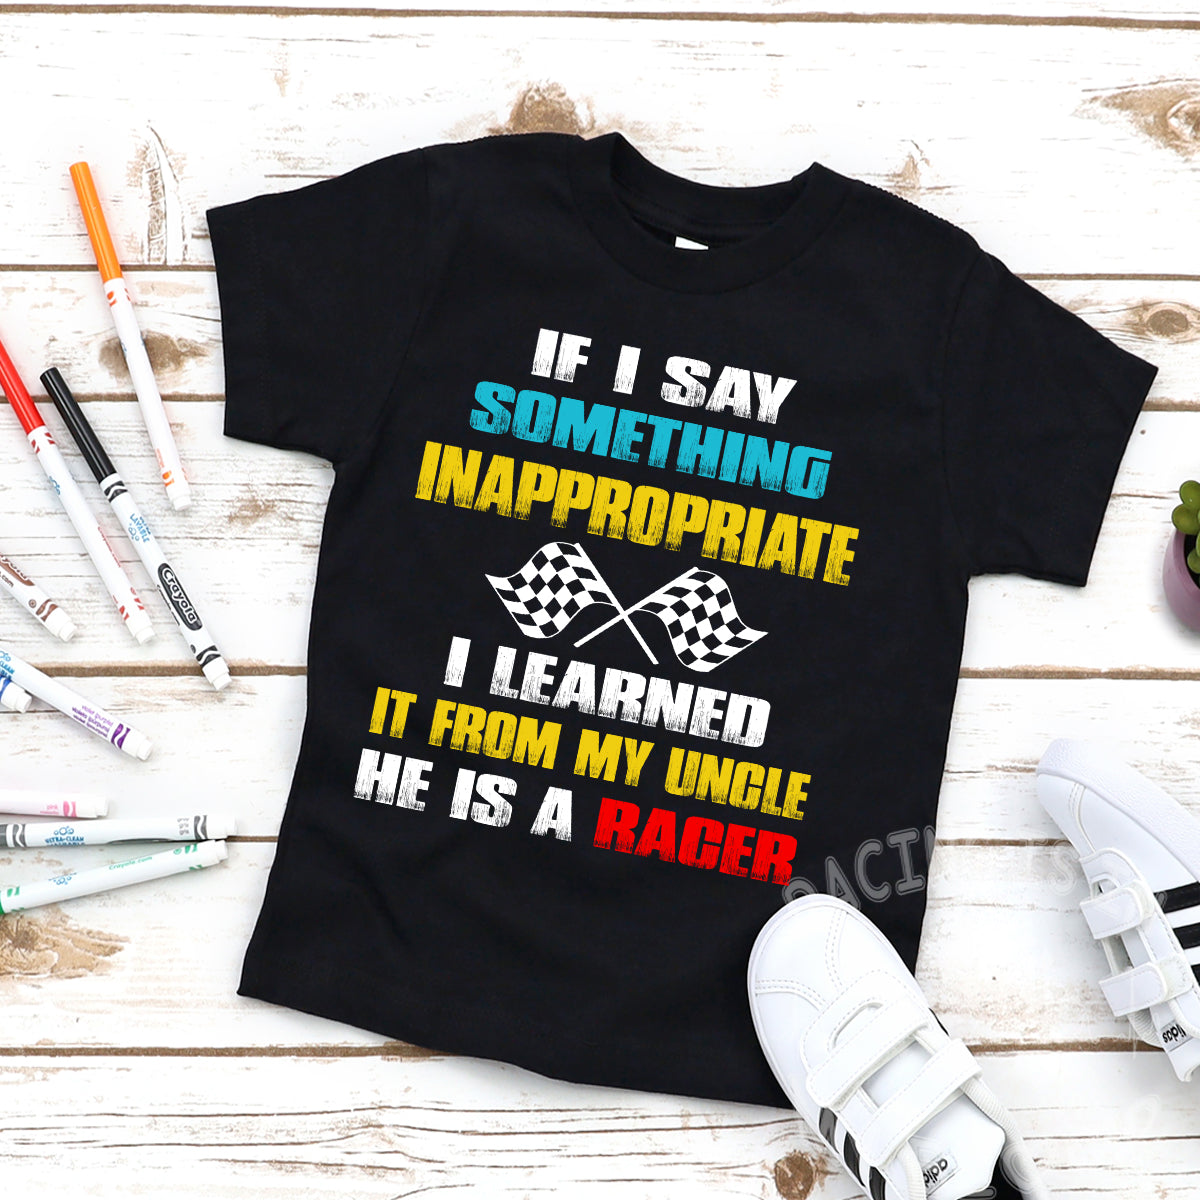 If I Say Something Inappropriate I Learned It From My Uncle he Is A Racer T-Shirt!